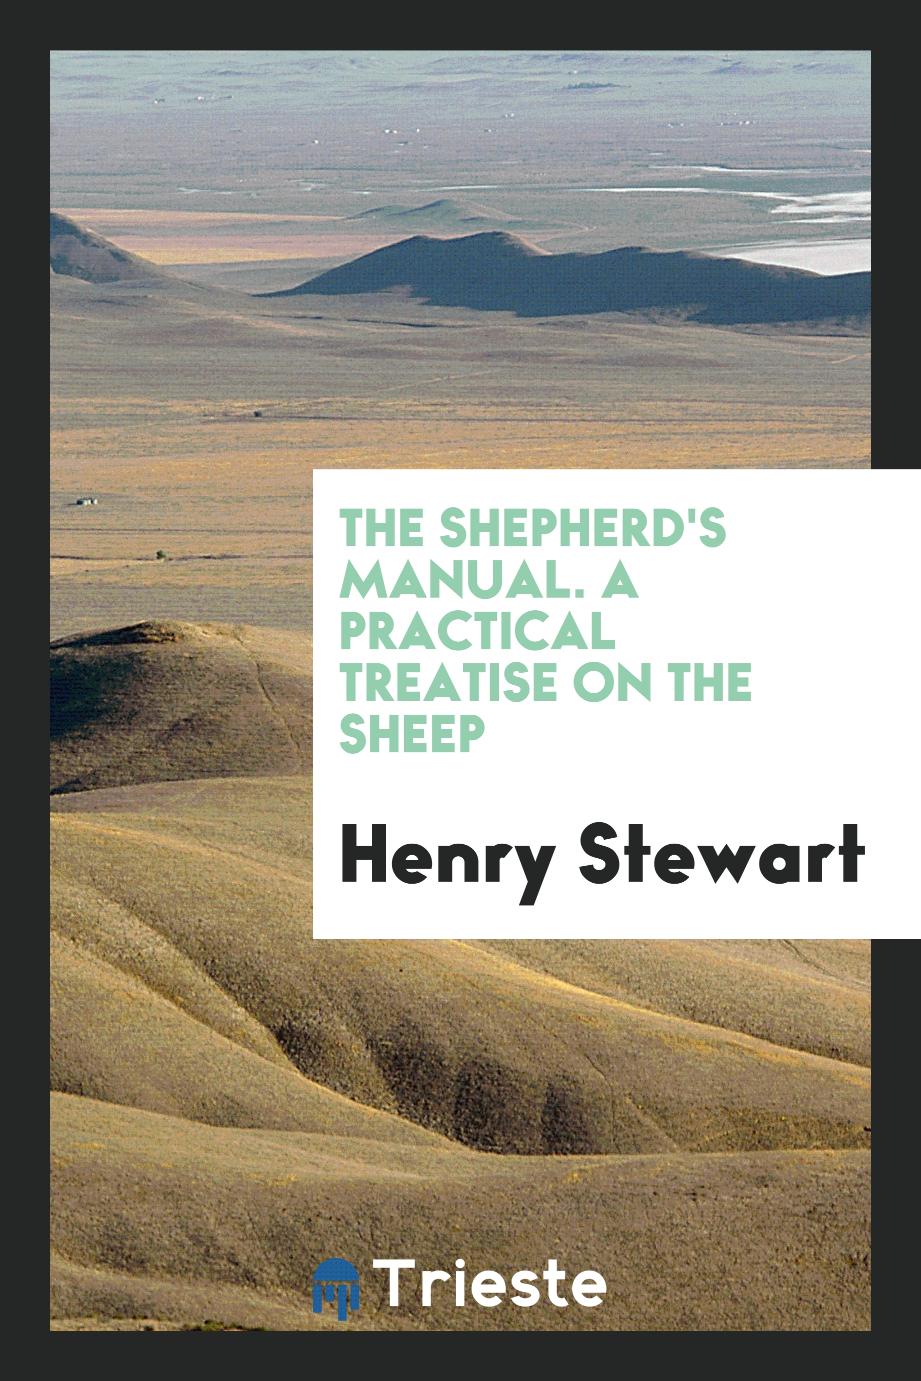 The shepherd's manual. A practical treatise on the sheep